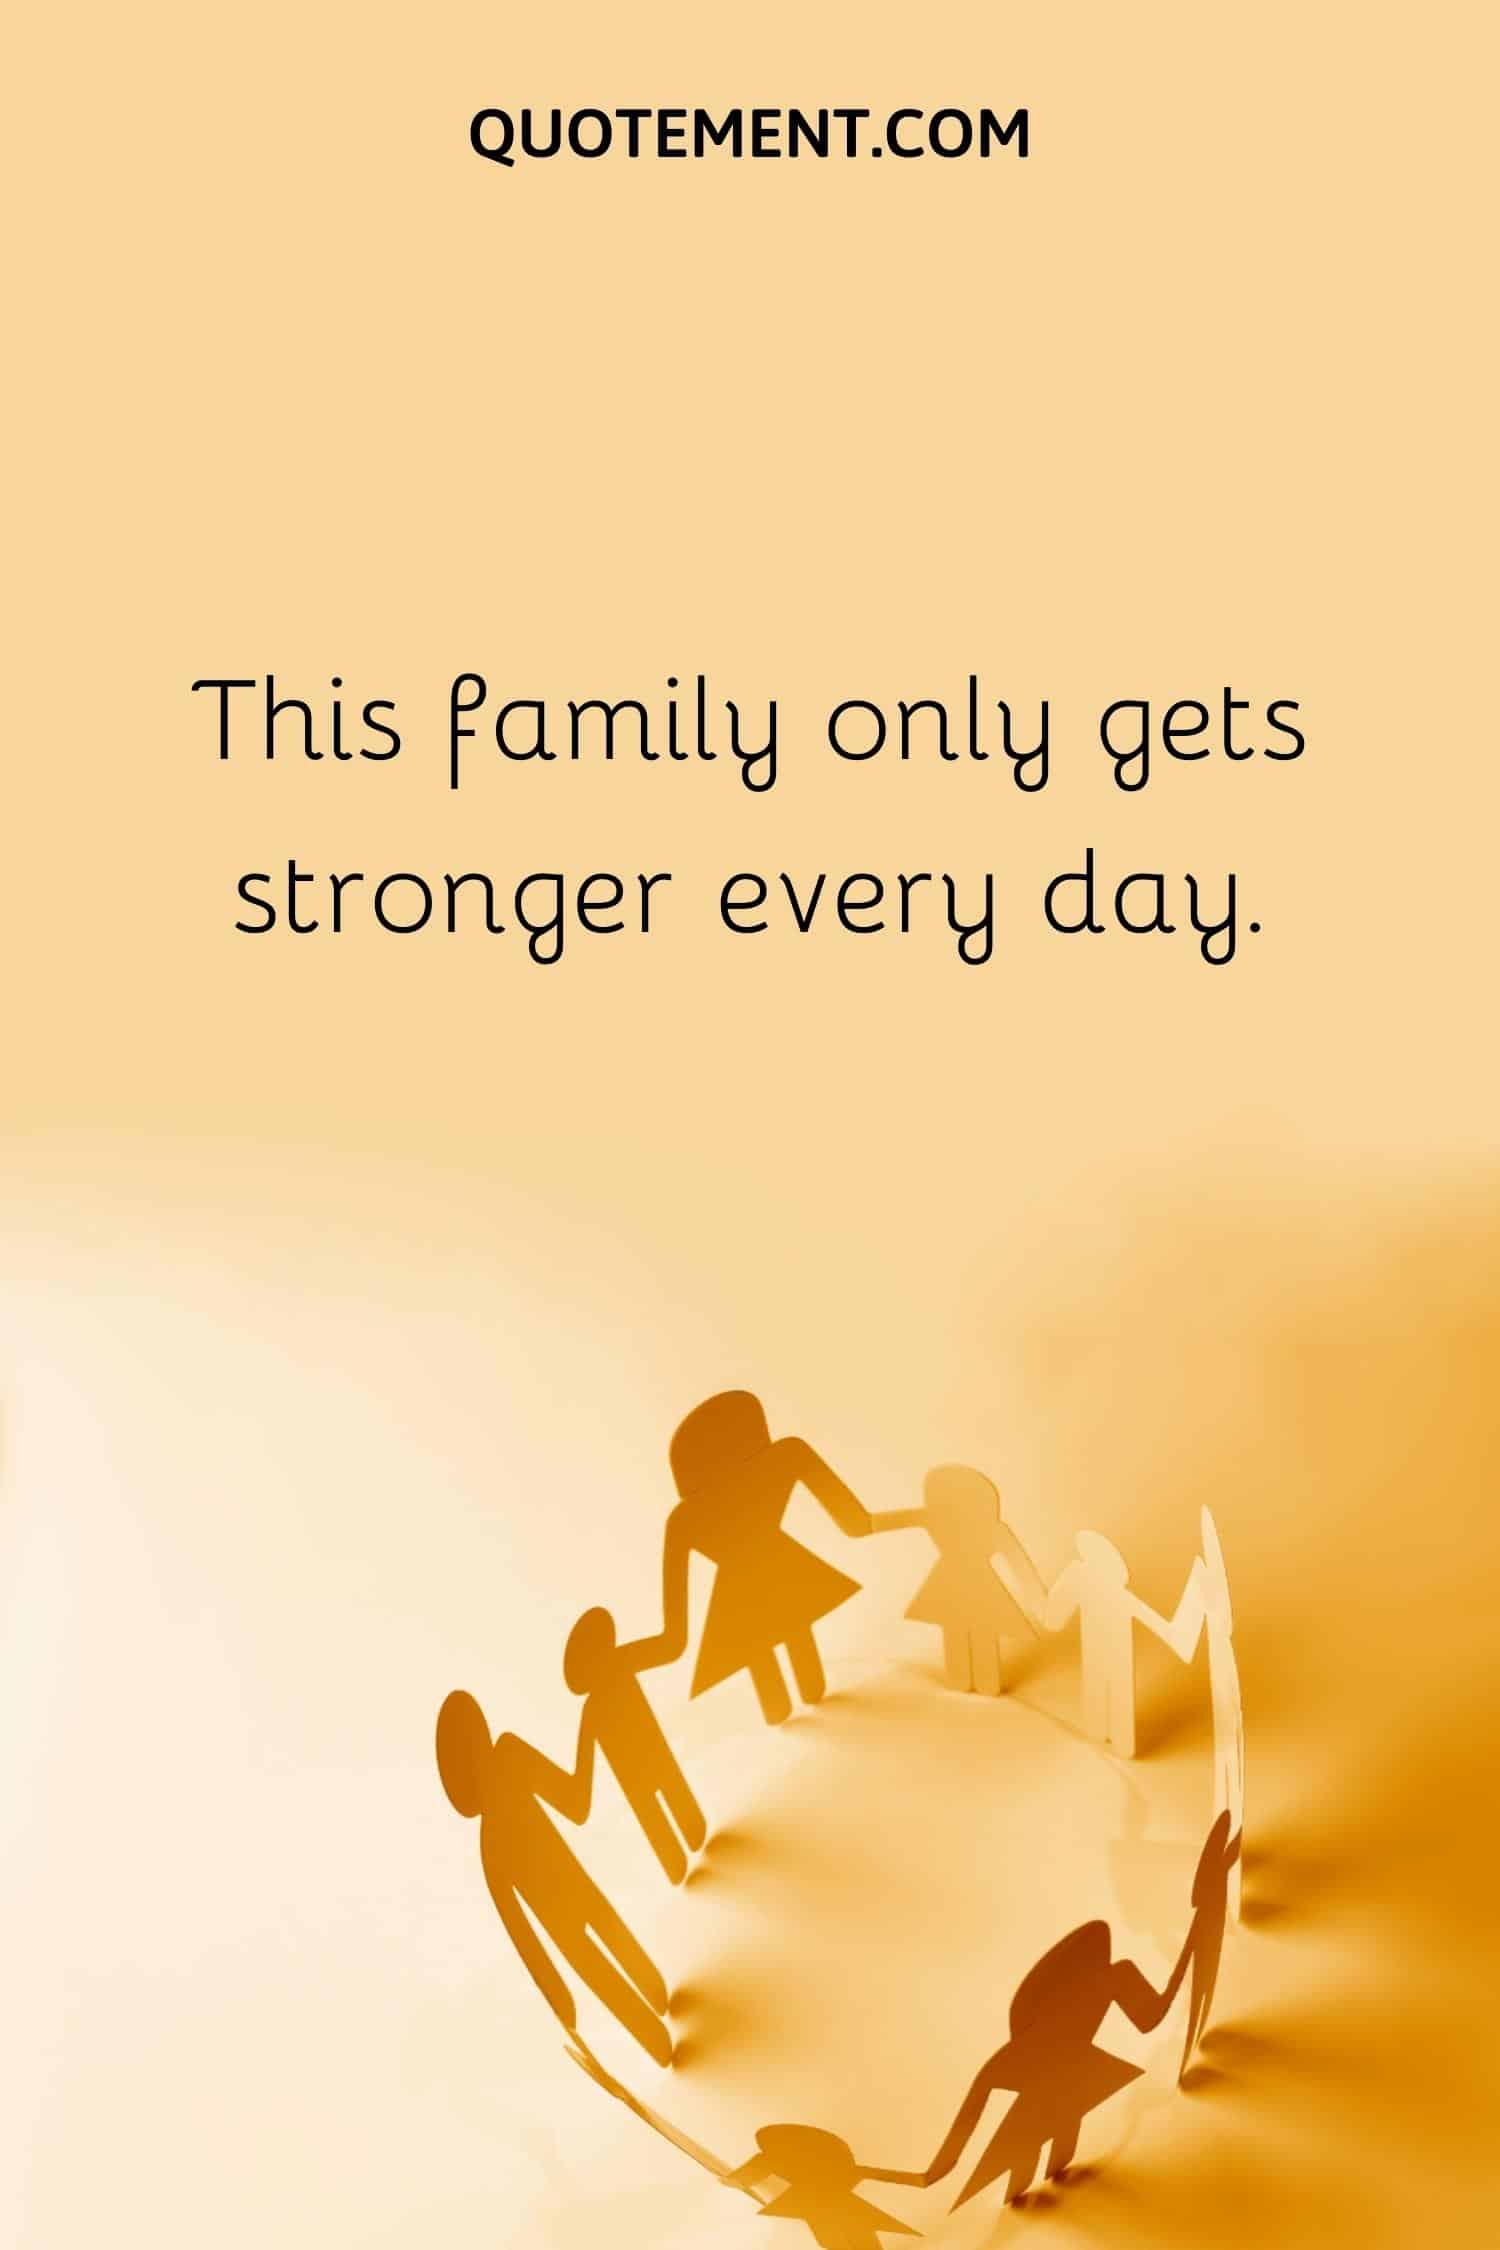 This family only gets stronger every day